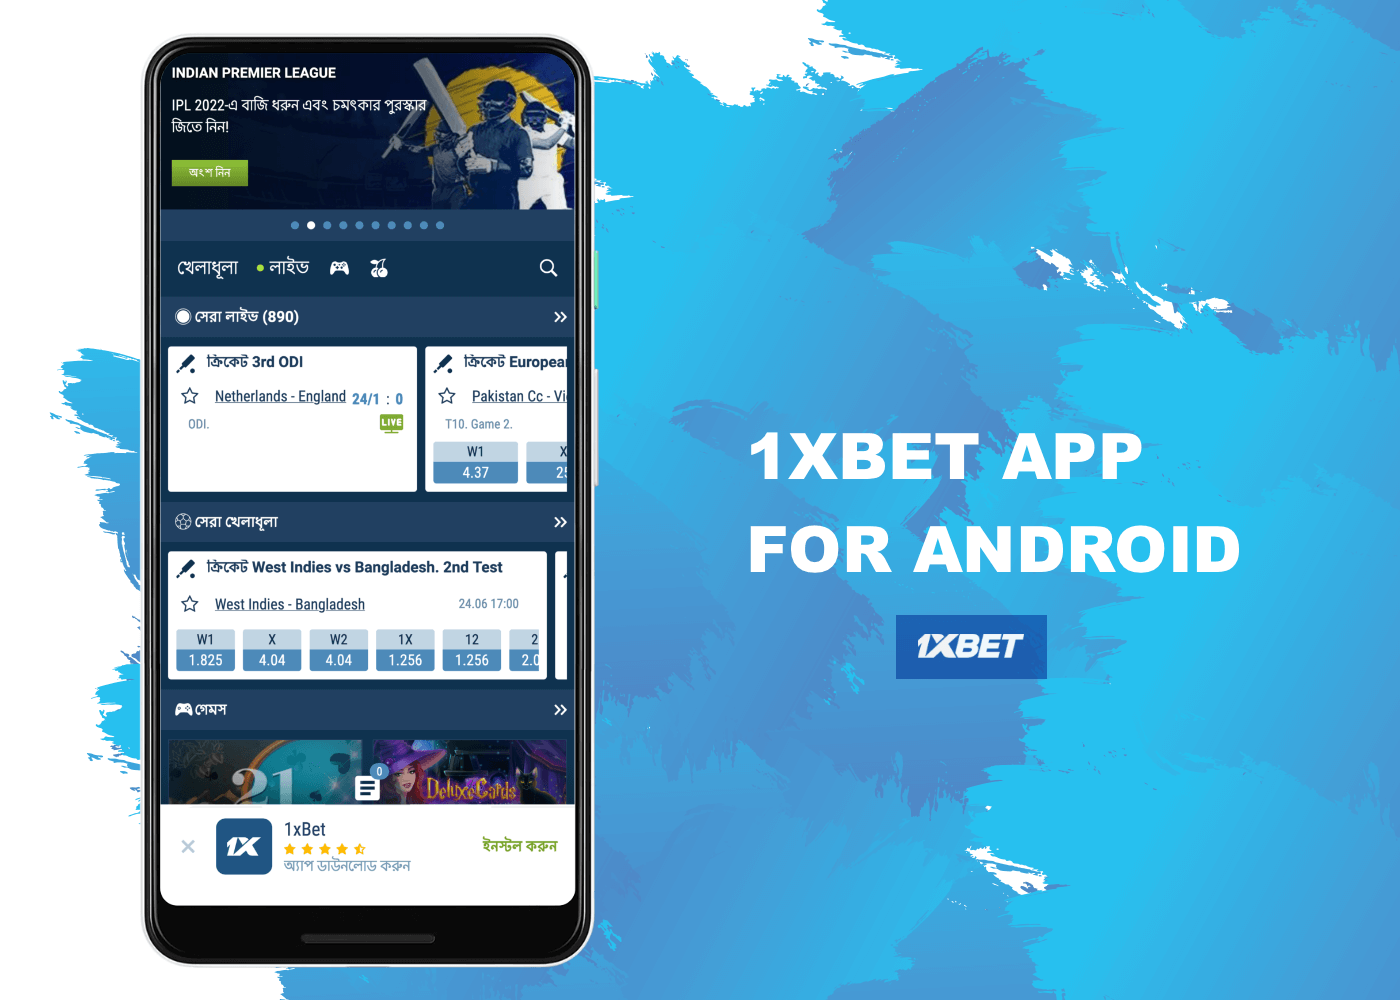 A step-by-step guide on how to download the 1xbet app on android